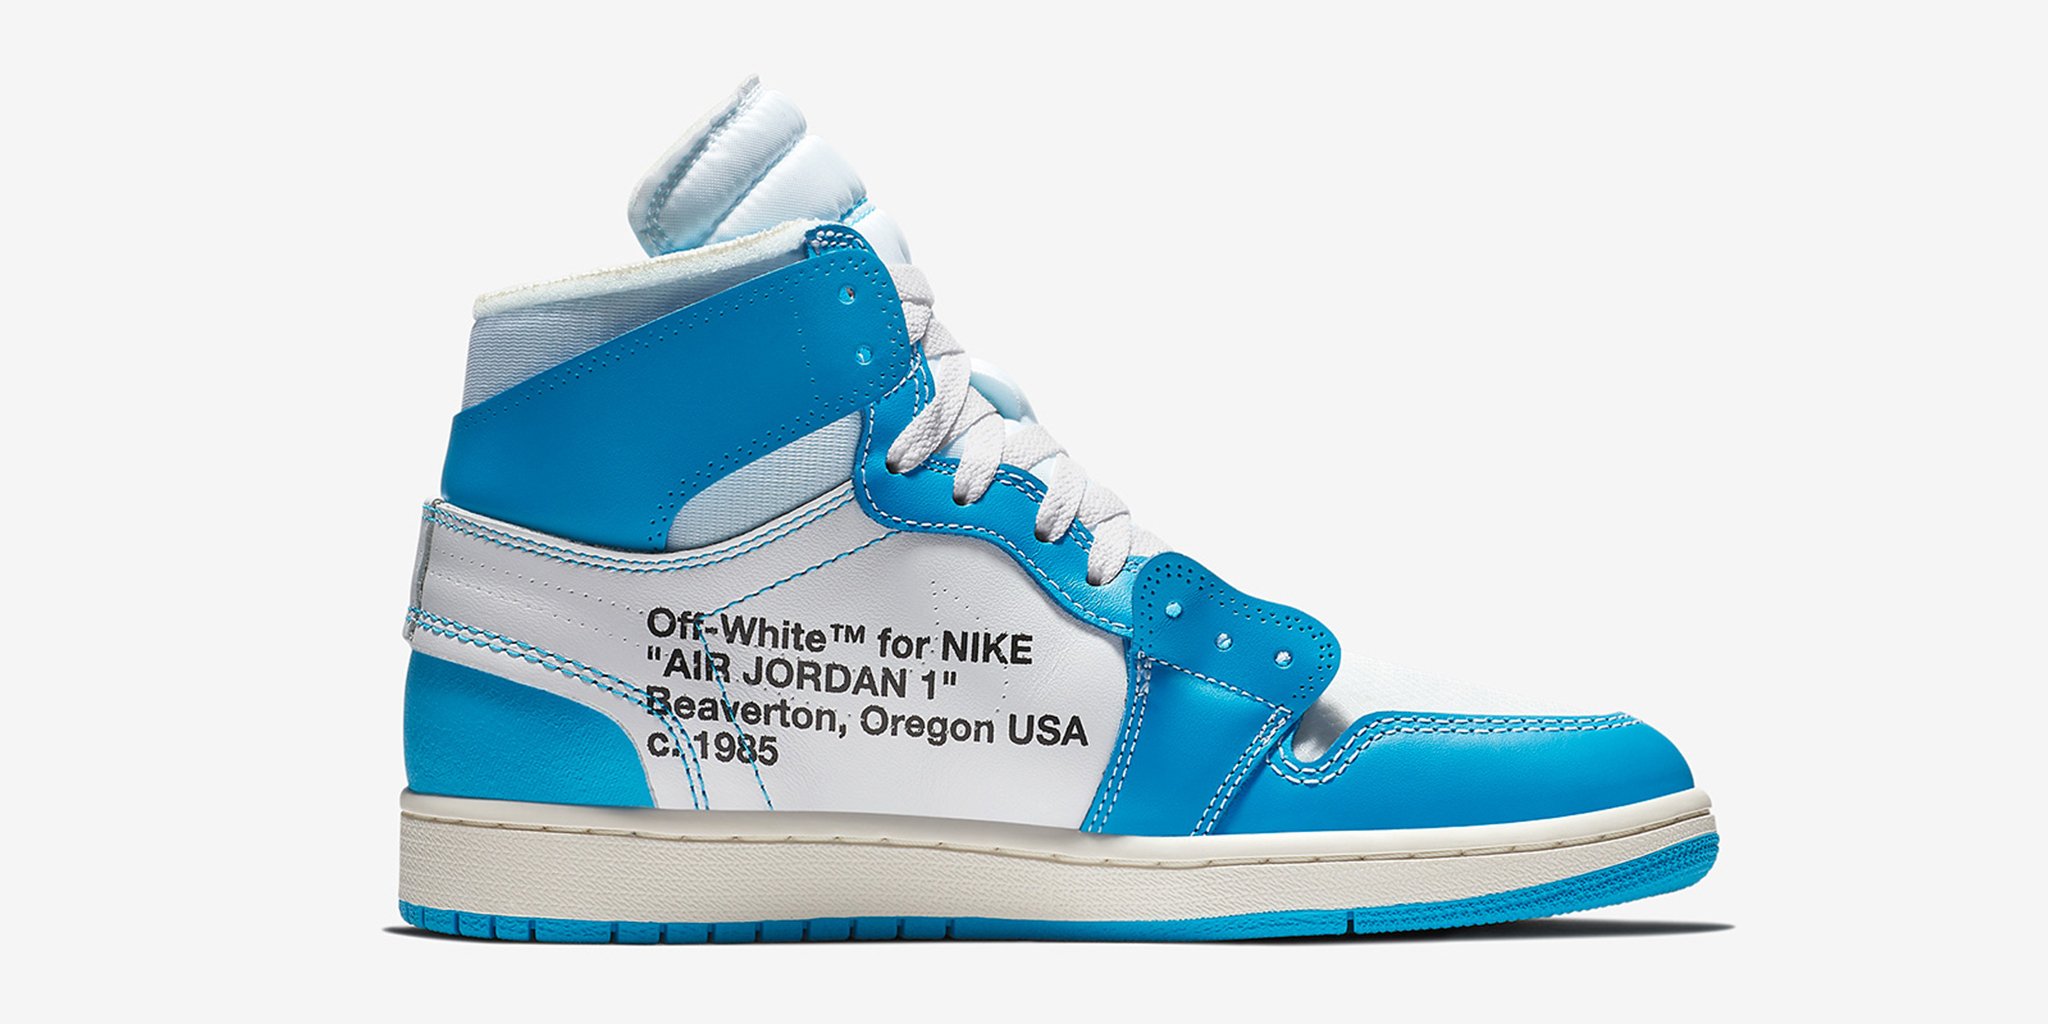 Titolo on Twitter: "Off-White x Jordan 1 "UNC“ is now available via Online Raffle. Choose between online and in-store pick up (Zurich, Switzerland). Registration closes on Friday, 22nd at